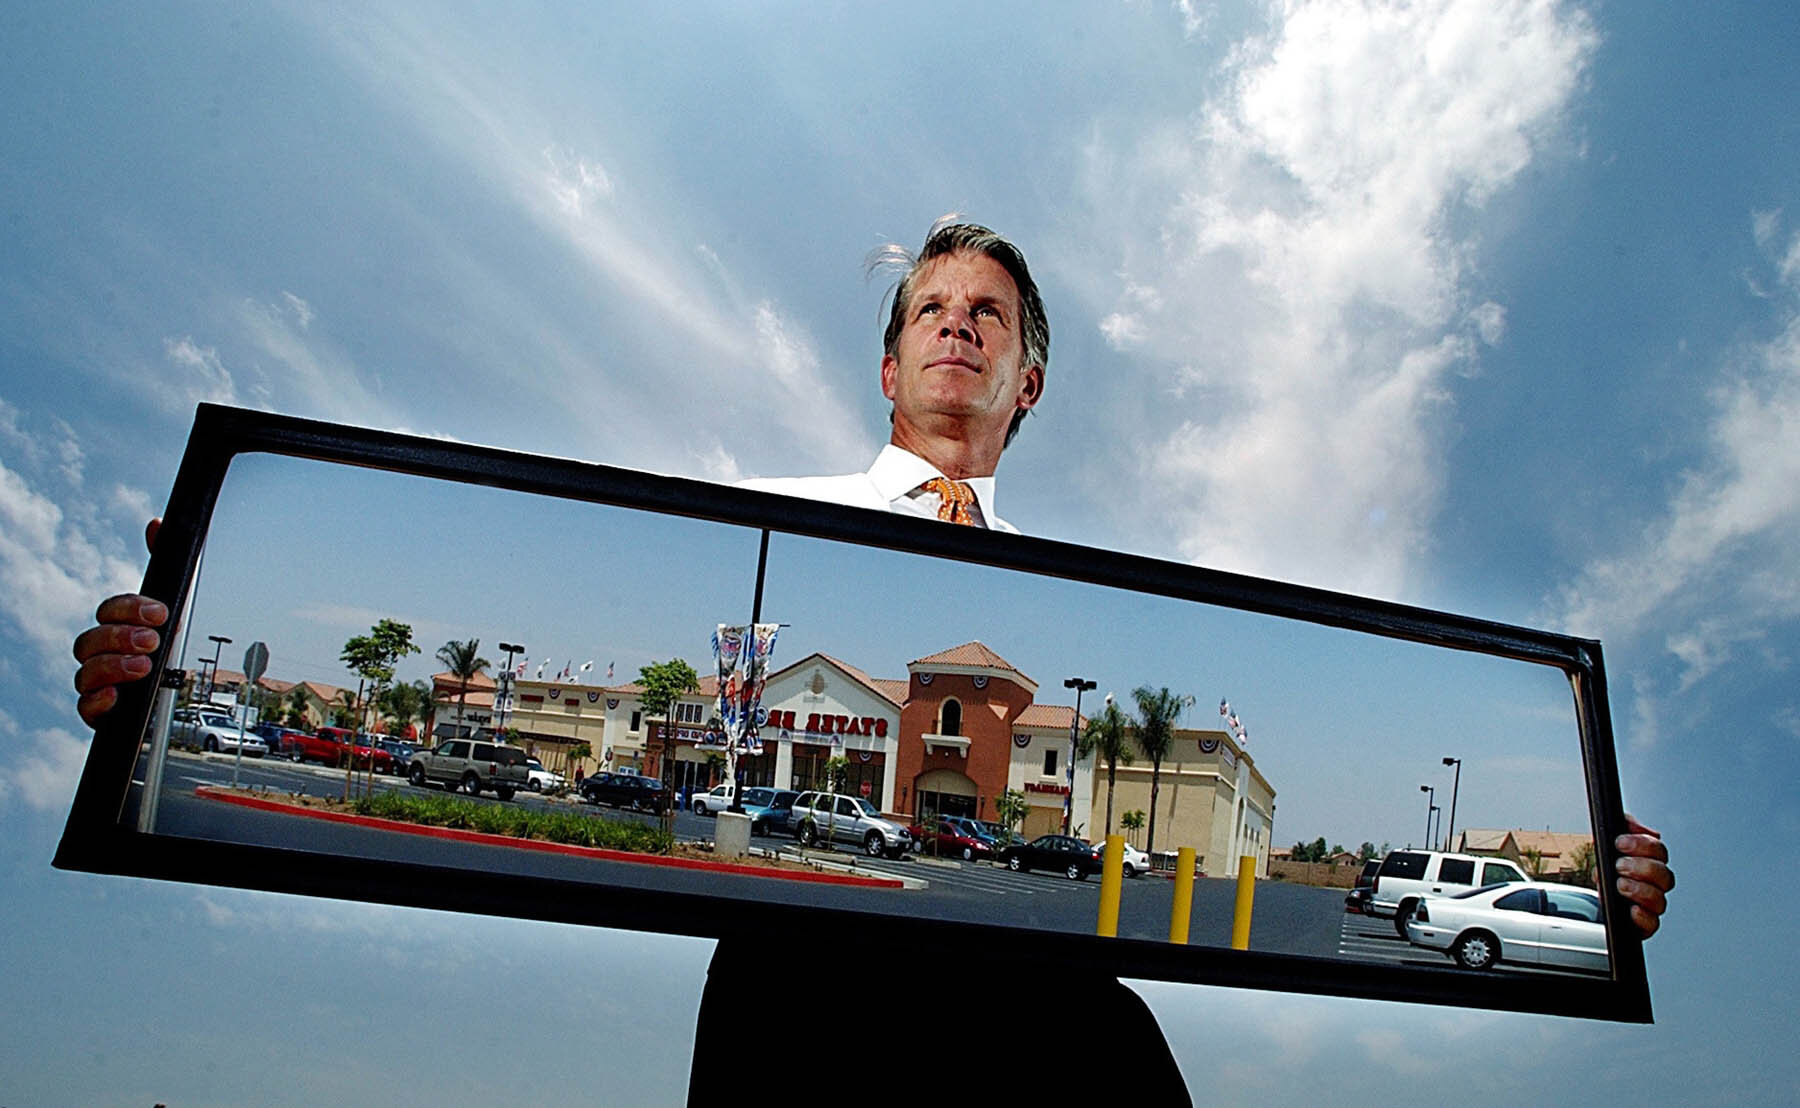  James Brooks, President of the Empire Commercial Real Estate, LP with a mirror reflecting a Stater Bros. shopping center he oversaw the development of in Moreno Valley.   